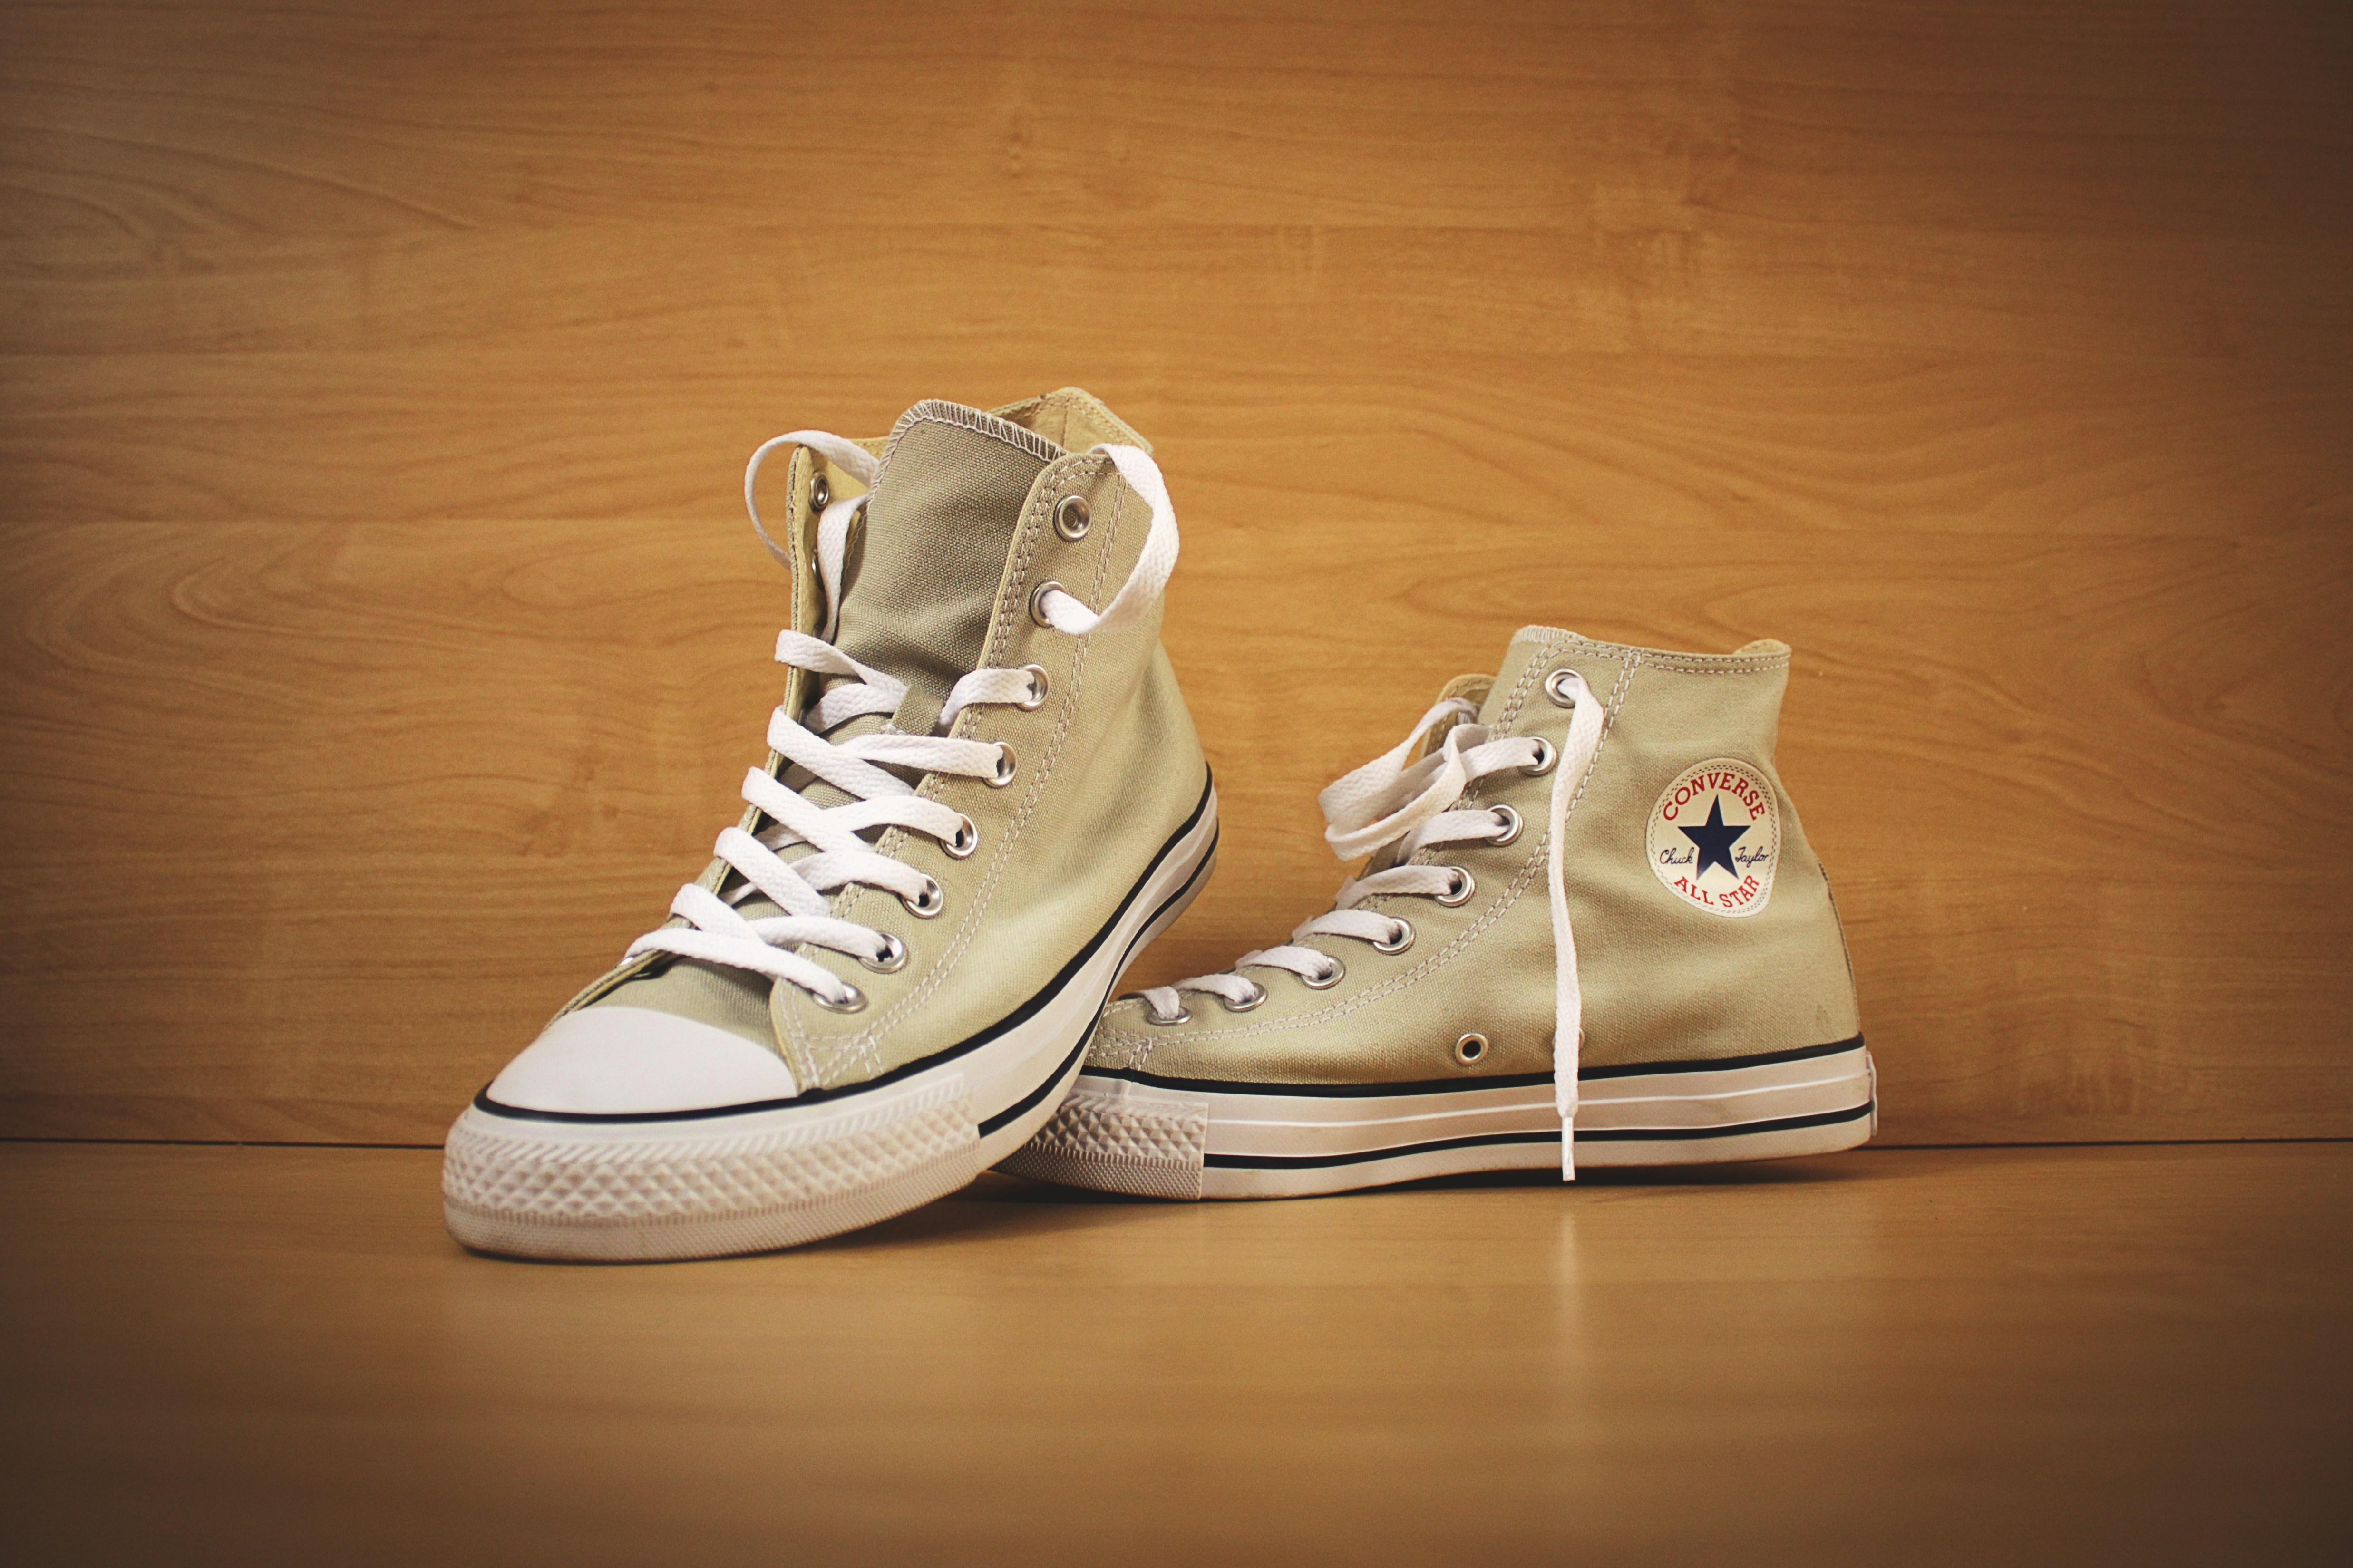 brown converse shoes